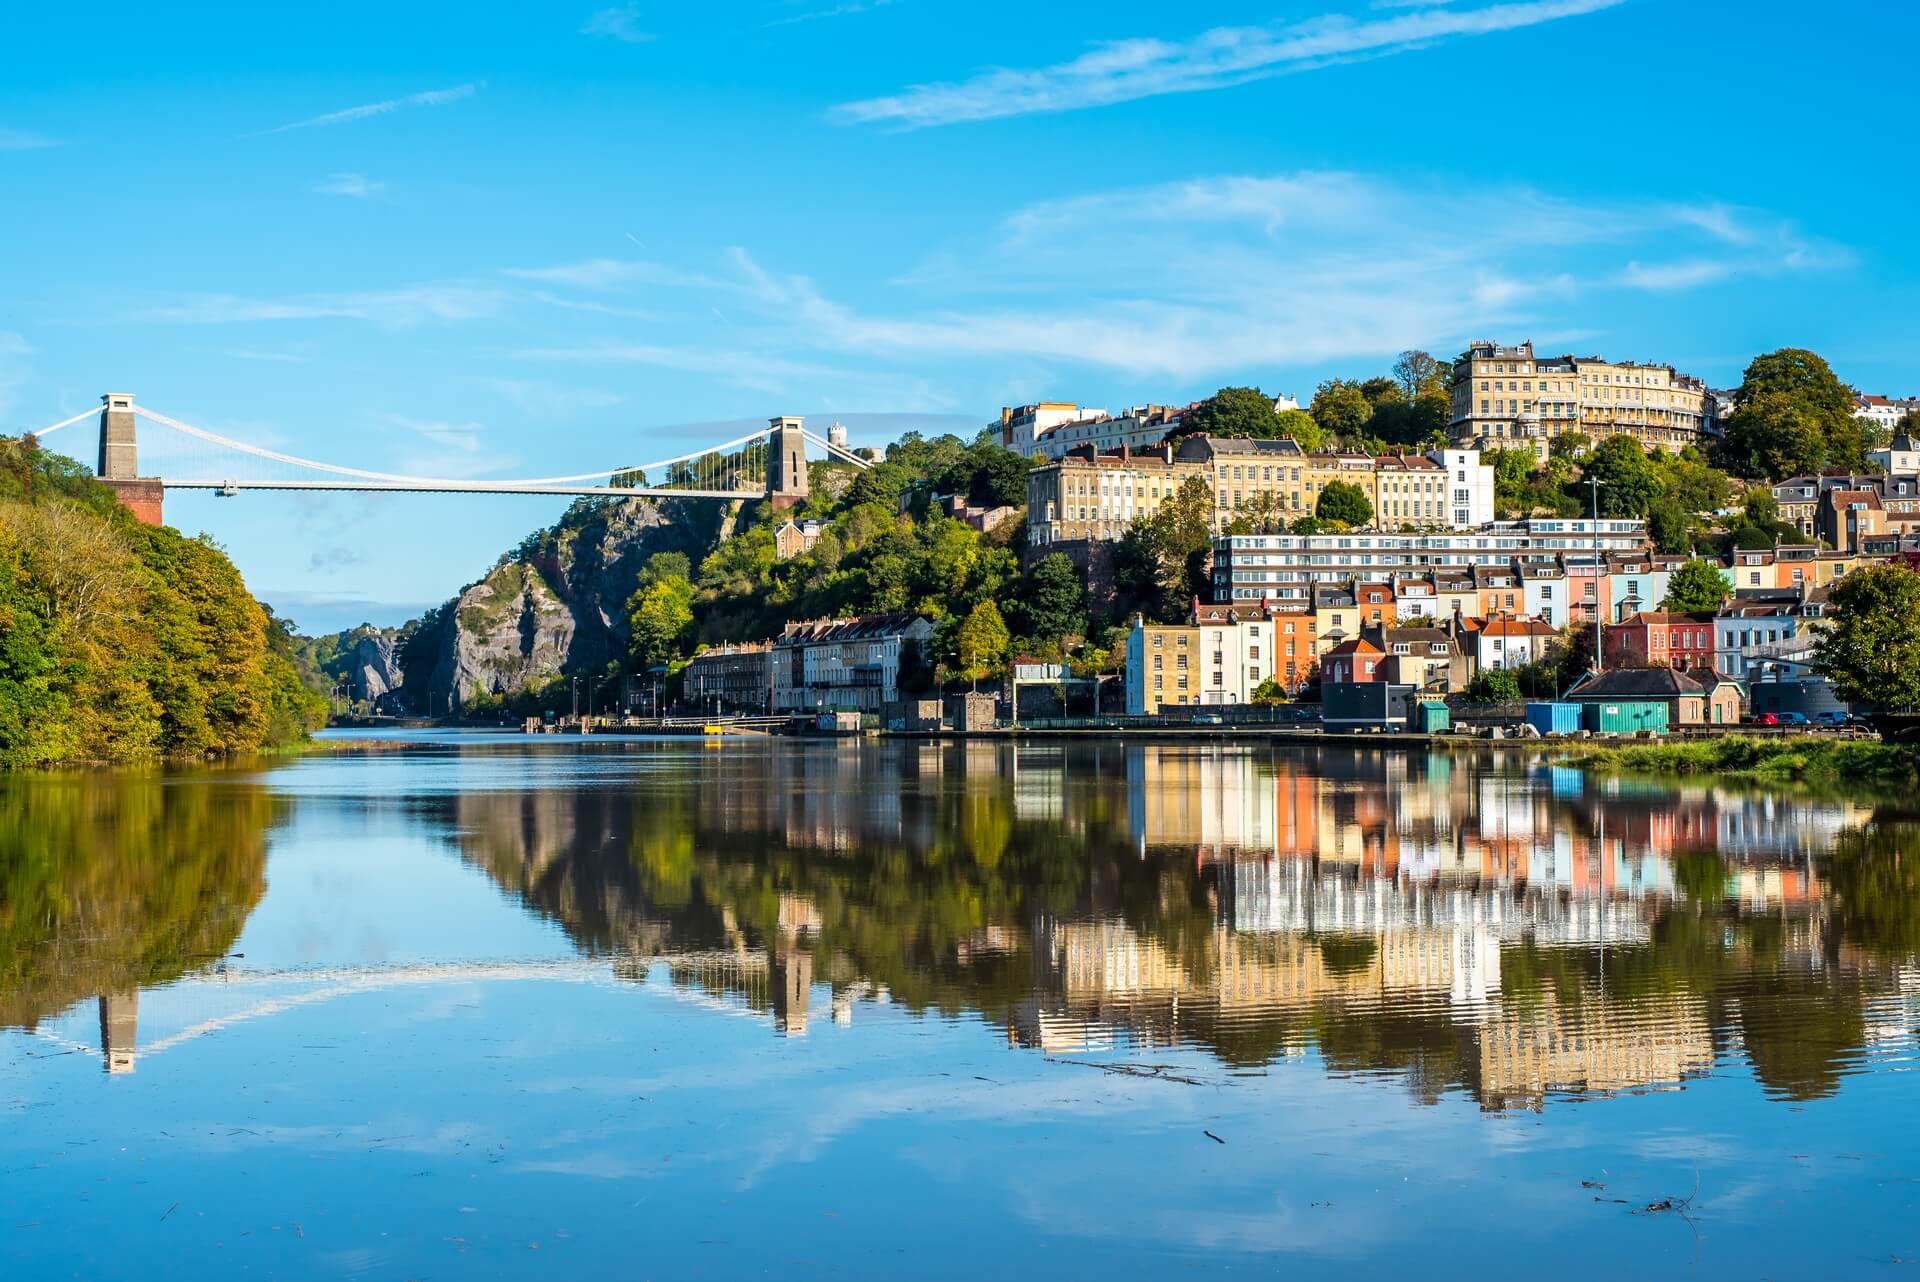 Clifton Suspension Bridge with Clifton and reflection, Bristol UK
